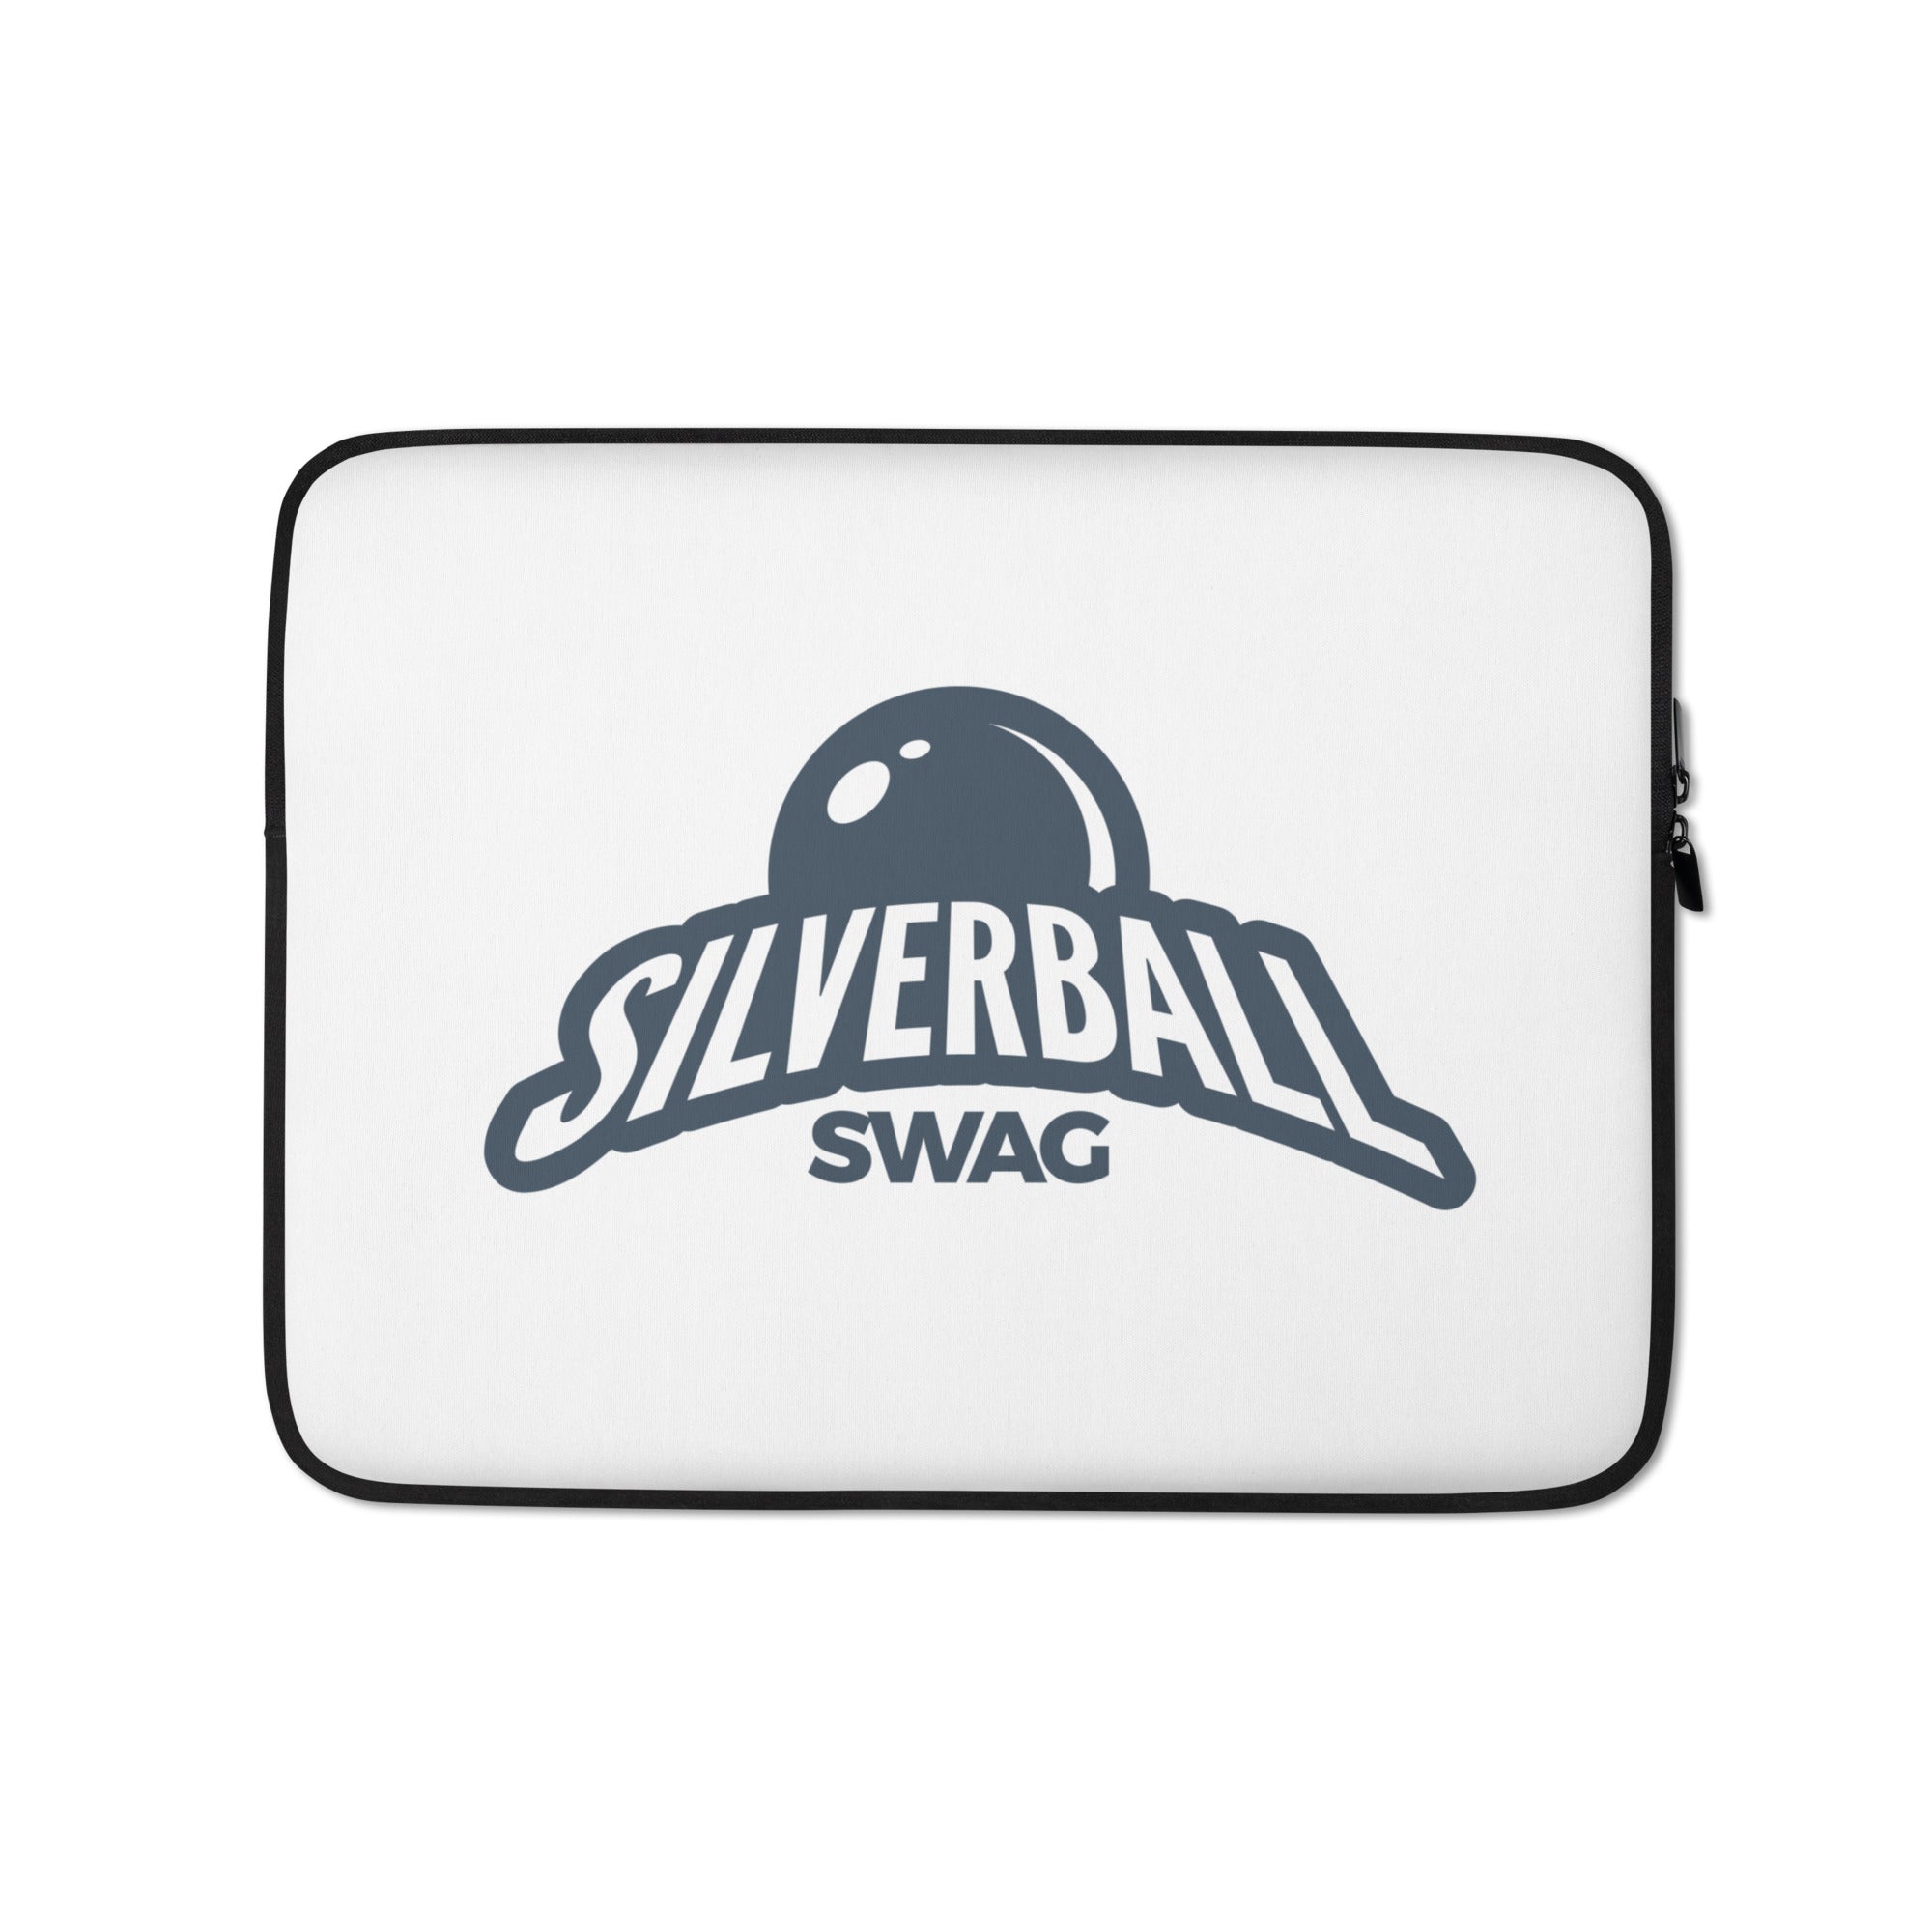 Silverball Swag - Laptop Sleeve